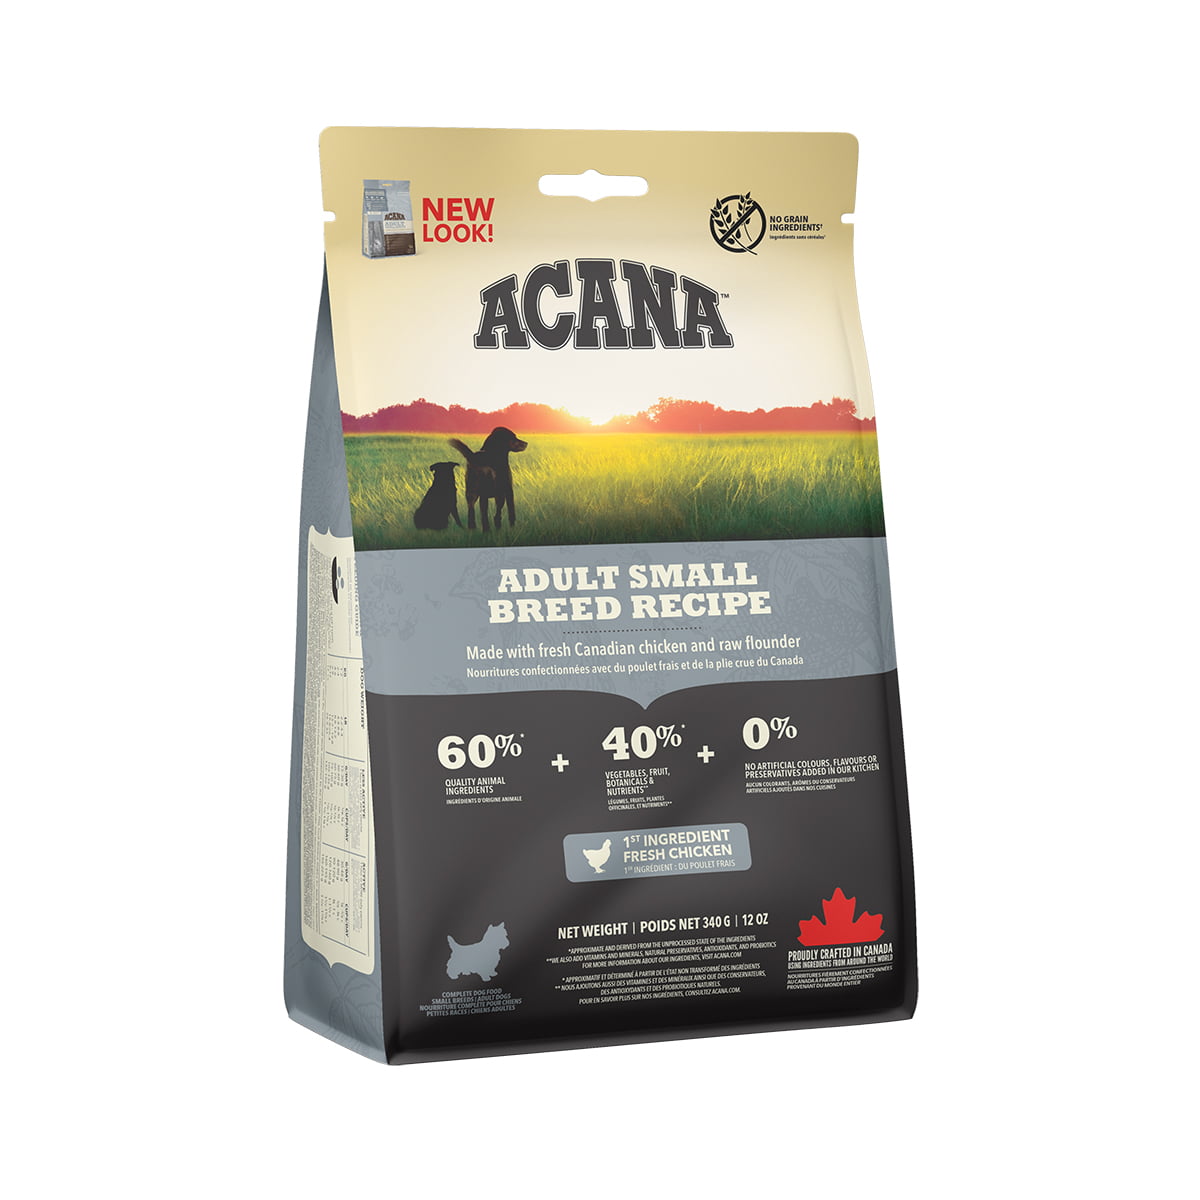 ACANA-Dog-Adult-Small-Breed-Recipe-Front-Right-340g